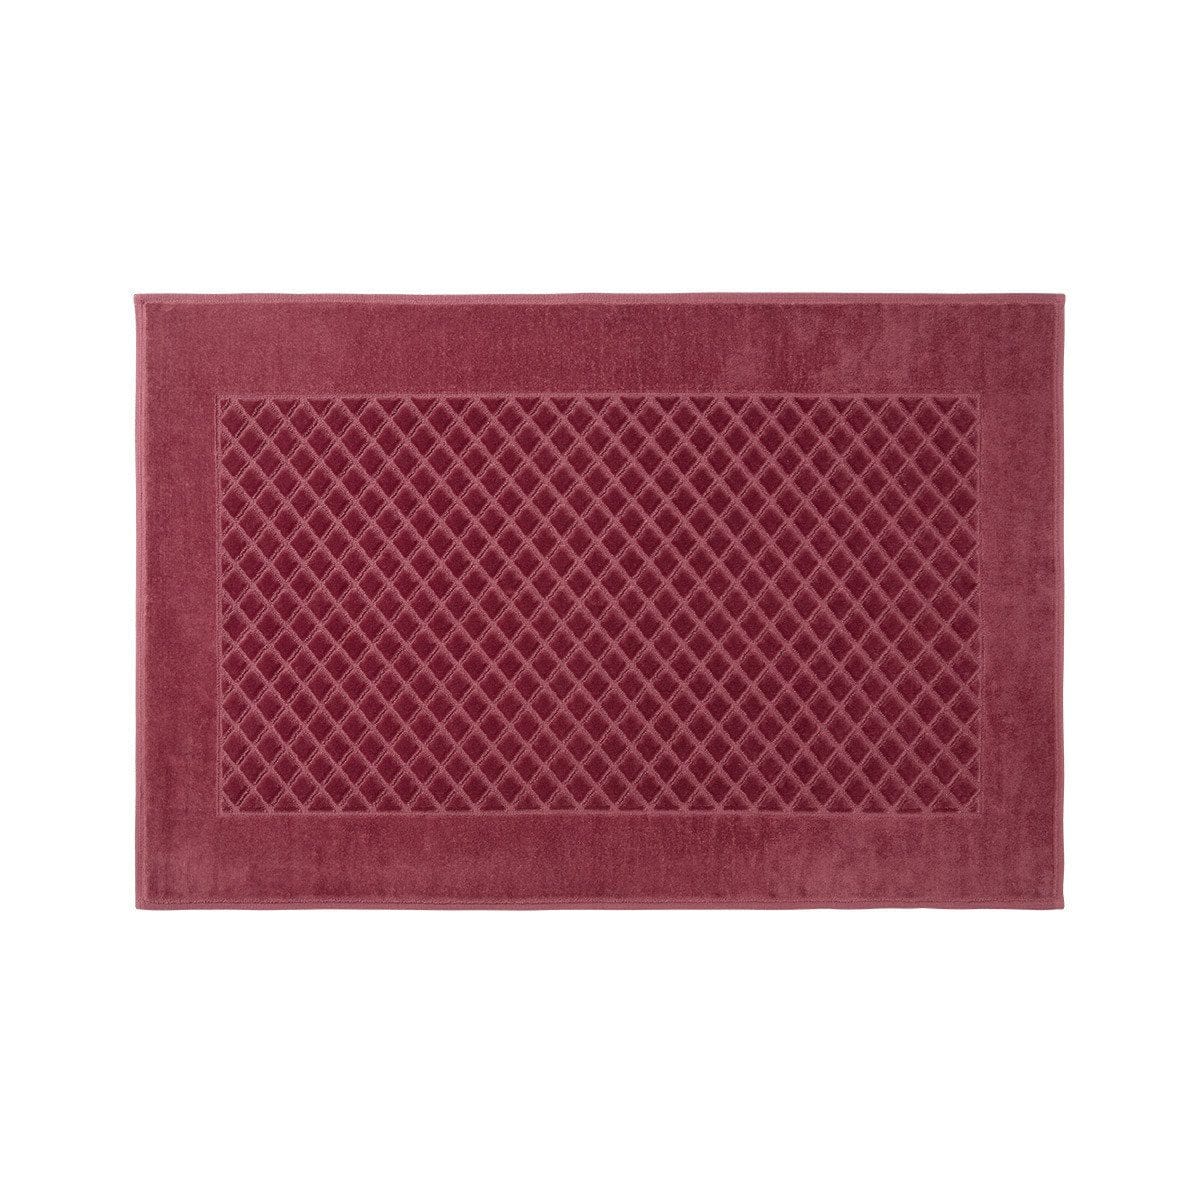 Mats & Rugs Etoile Bath Mat by Yves Delorme Yves Delorme